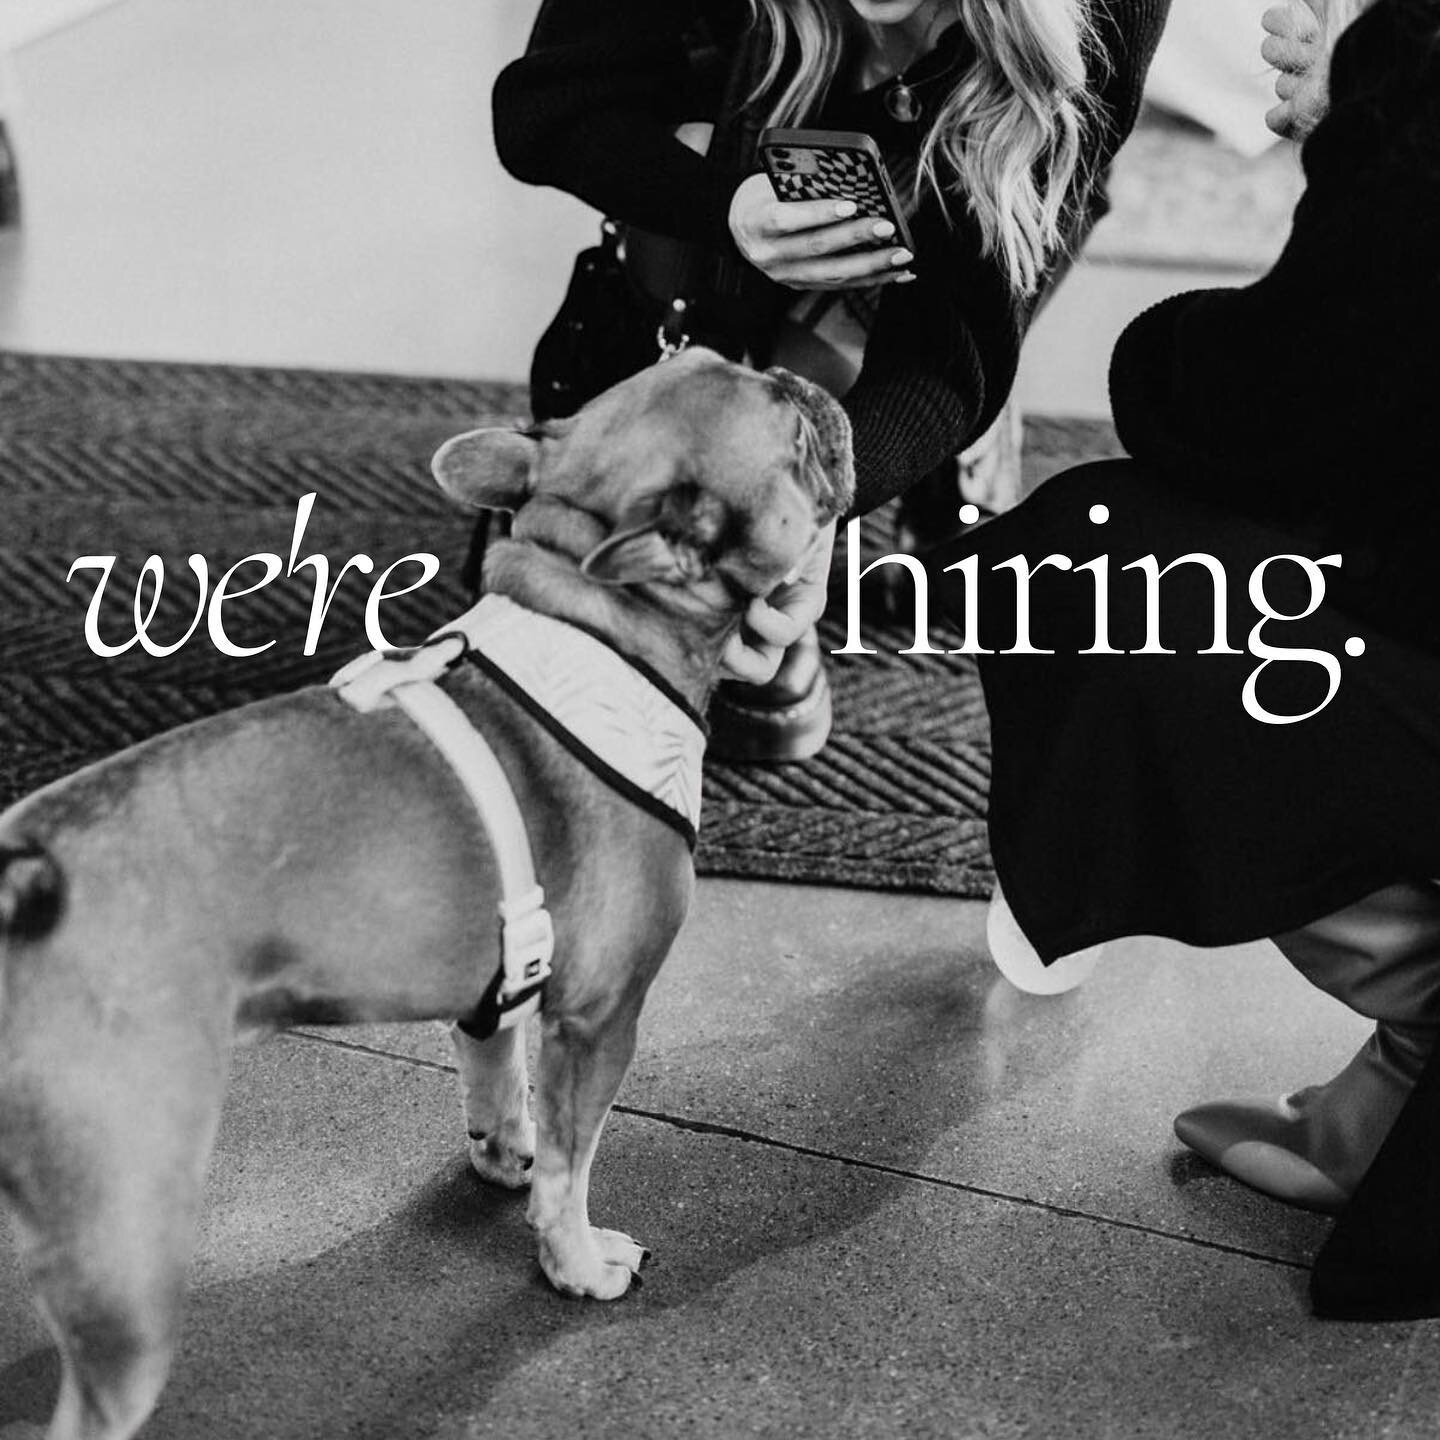 💓 W E &lsquo; R E  H I R I N G 💓

we&rsquo;re looking for another front desk coordinator to join our team and help kenny greet our lovely clients! 💫🐶🪩

if you are someone looking to dip your toes into the hair industry or love supporting others 